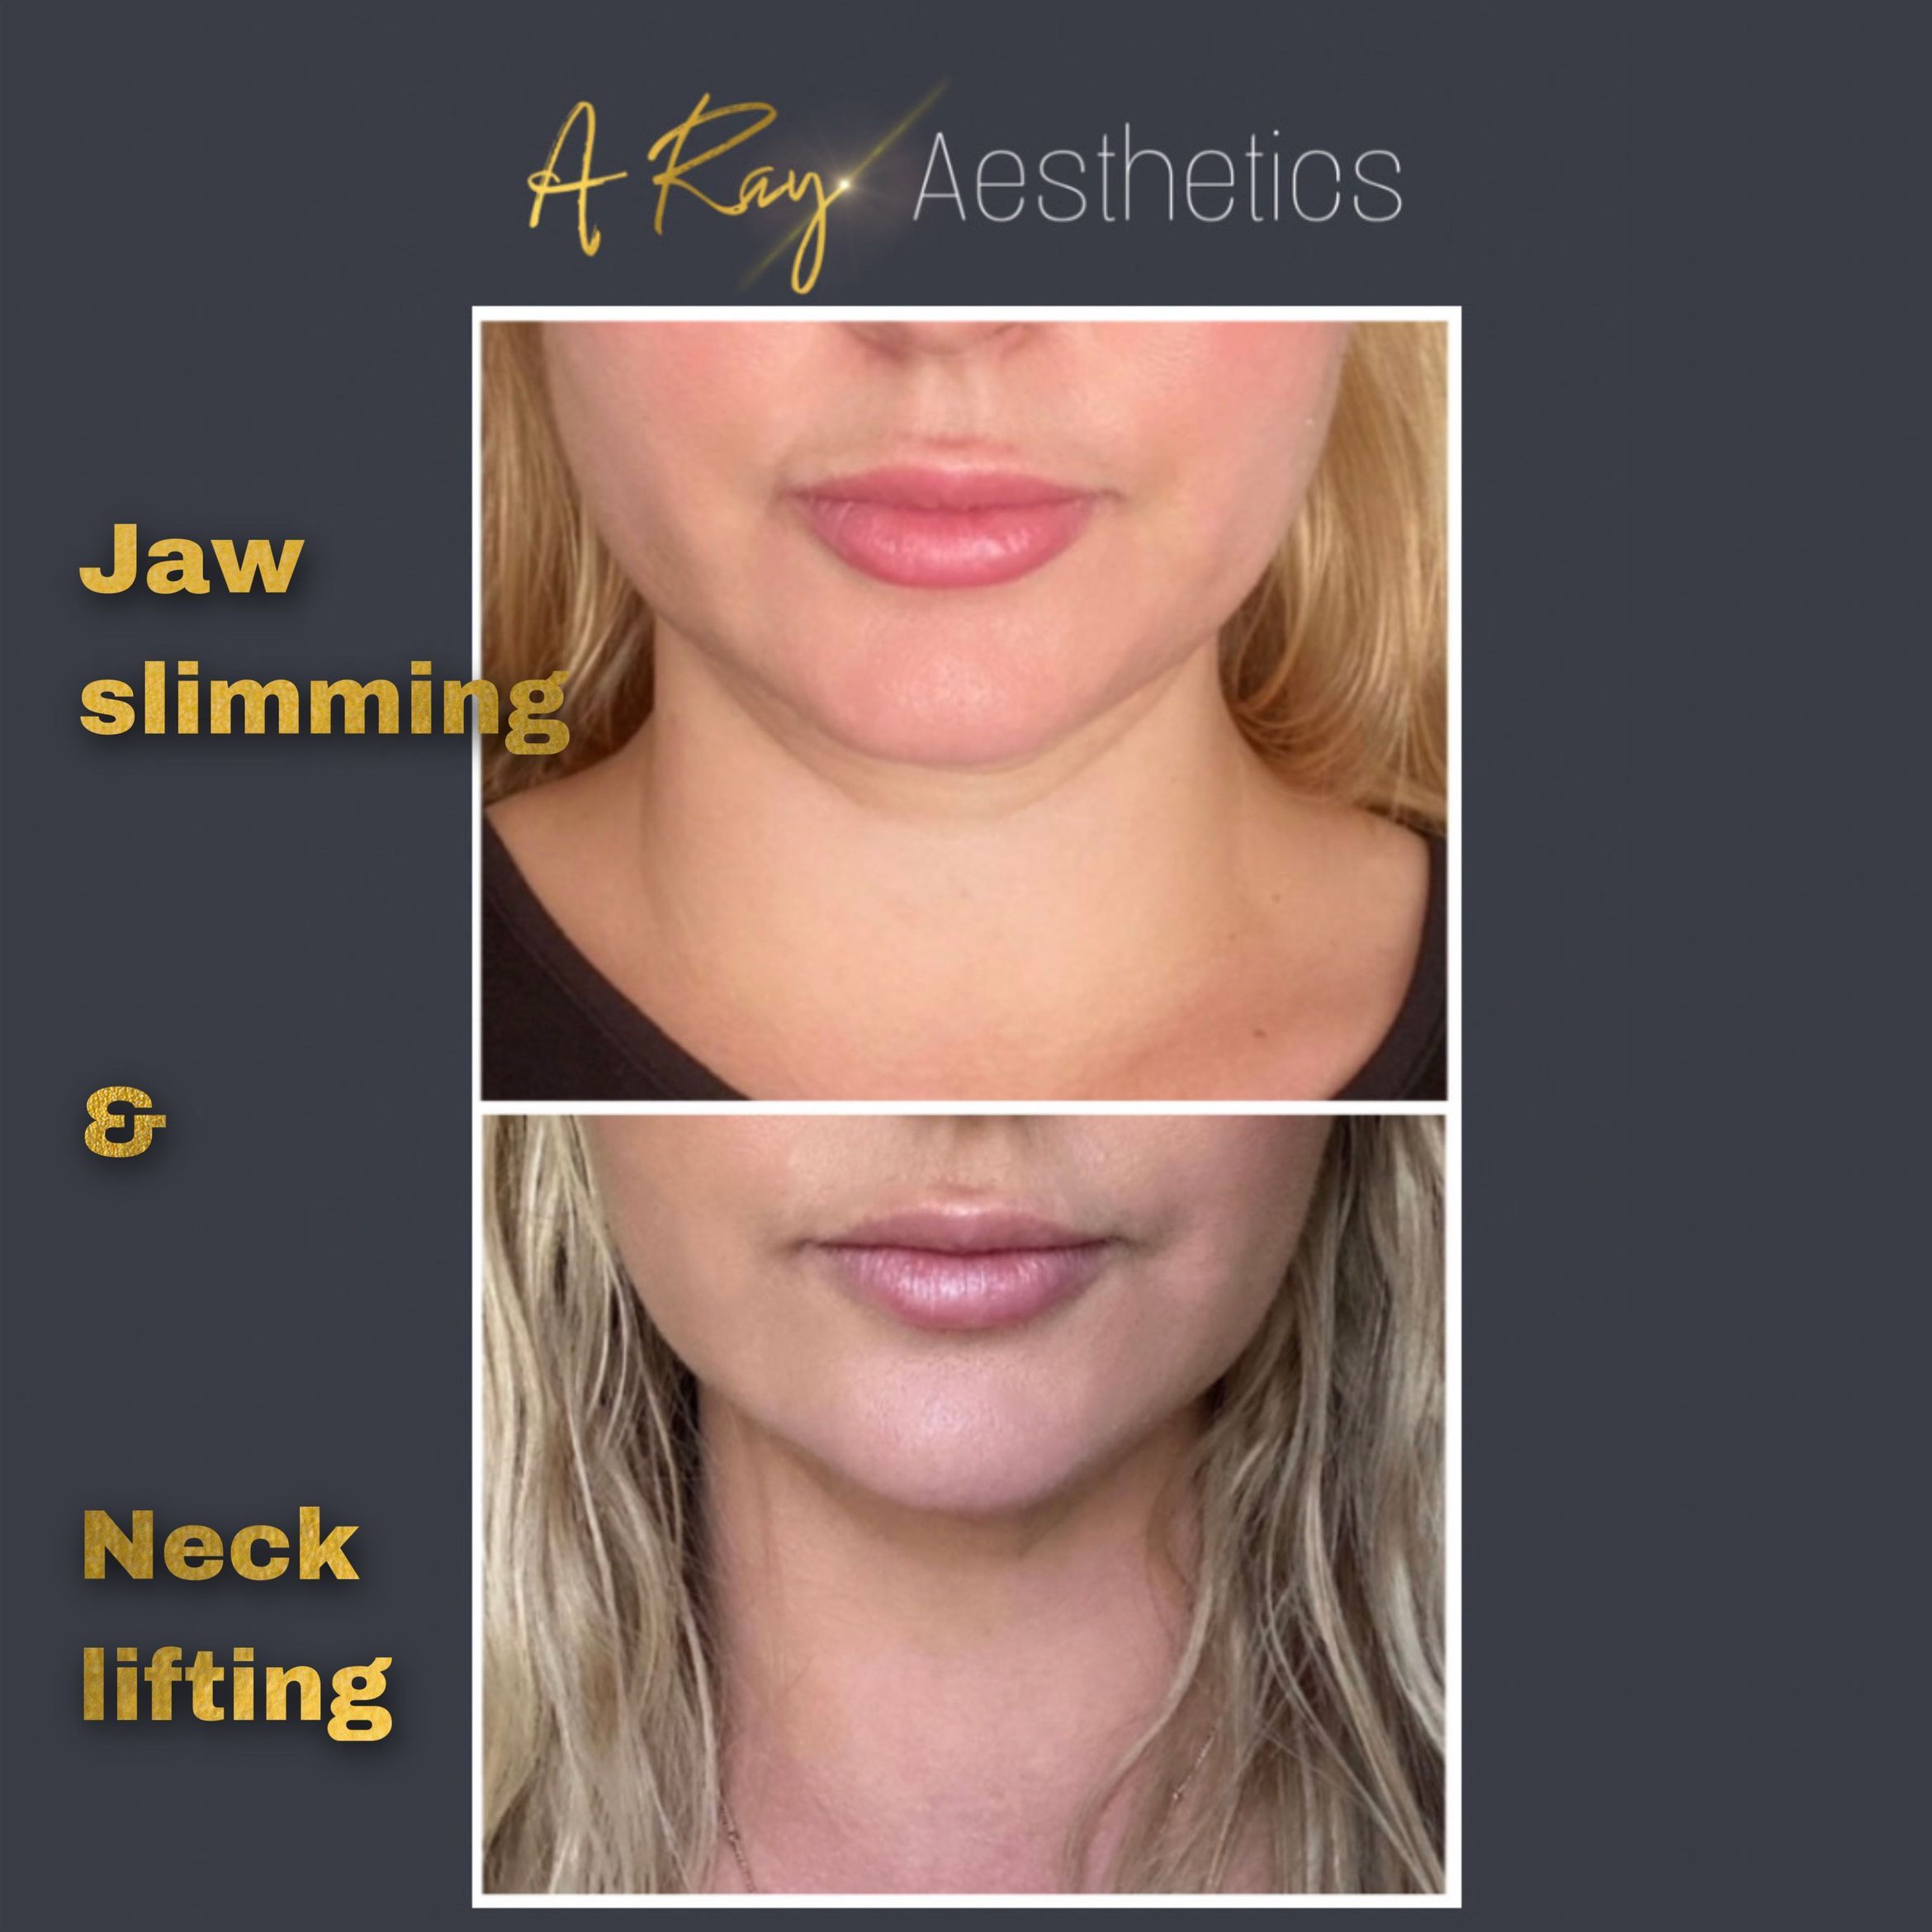 Jaw slimming & Neck lifting combined package portfolio